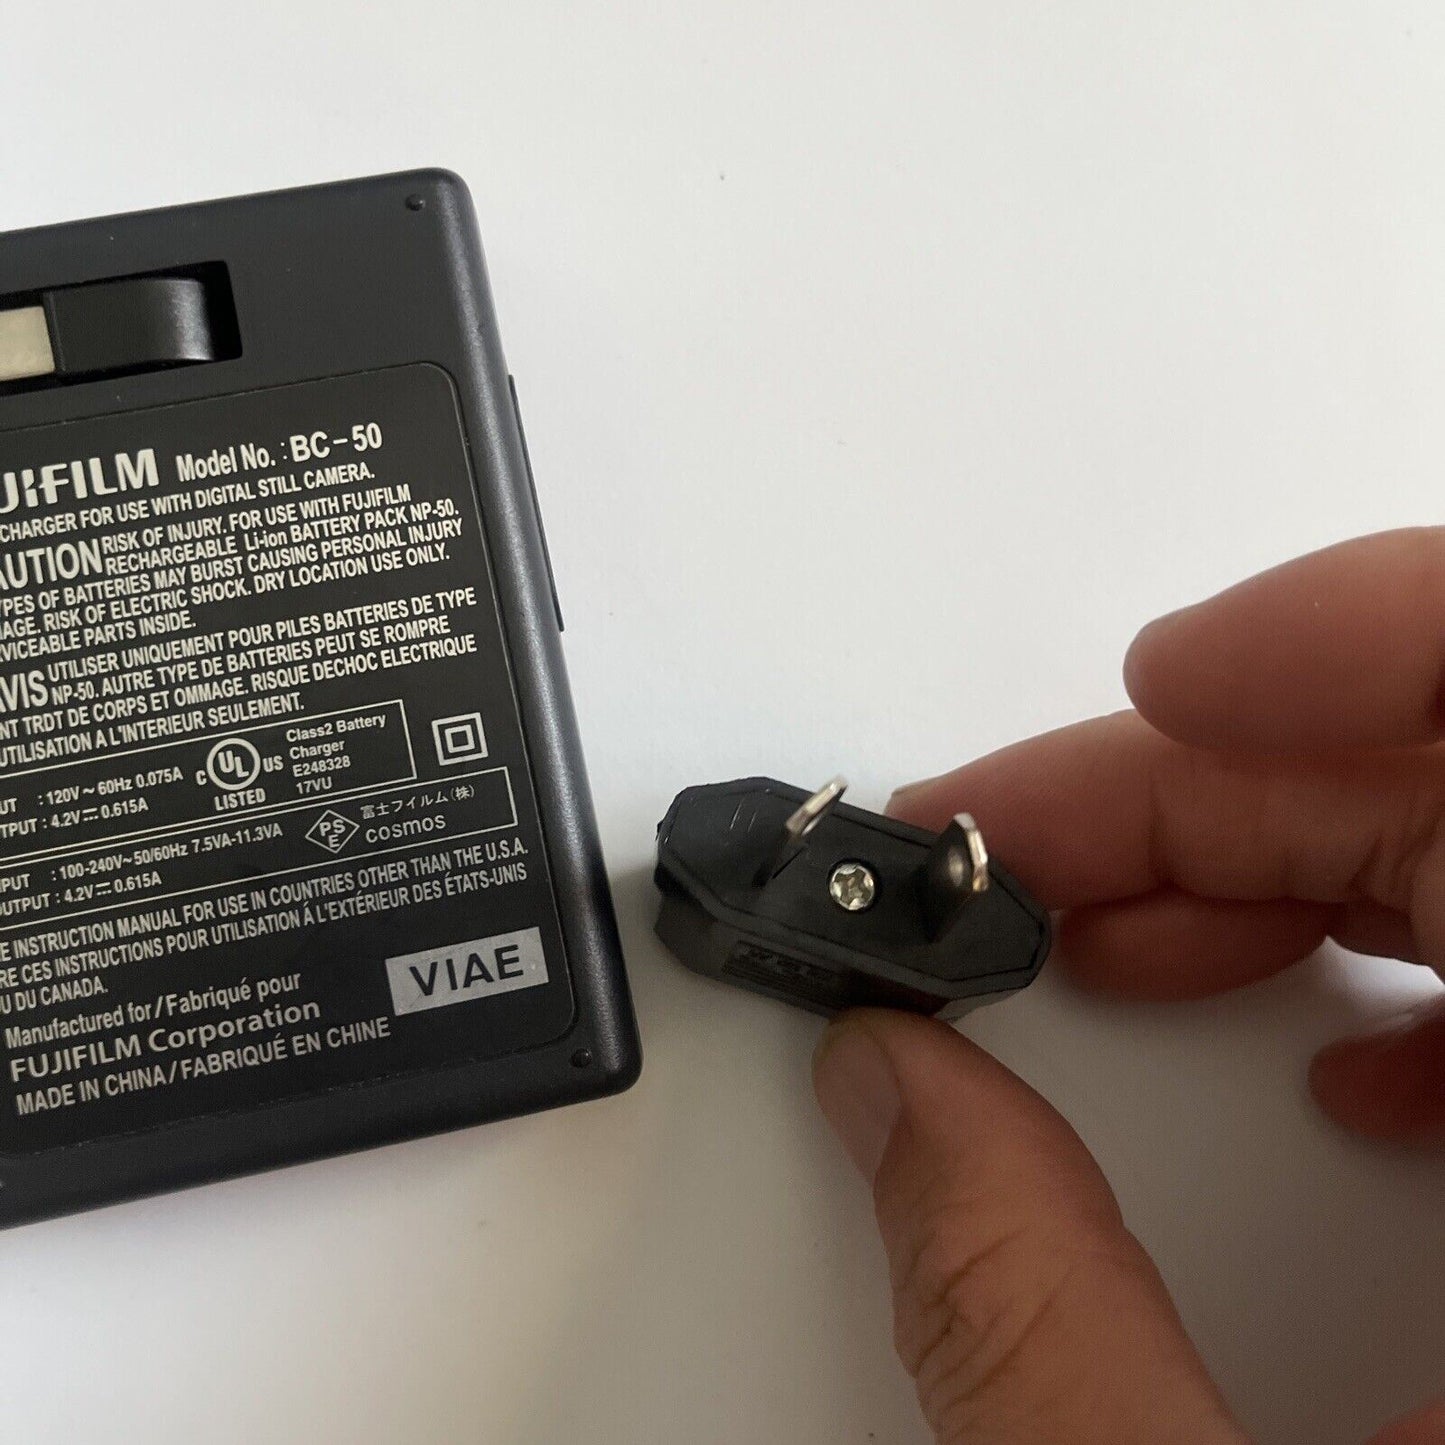 Genuine Fujifilm BC-50 Battery Charger